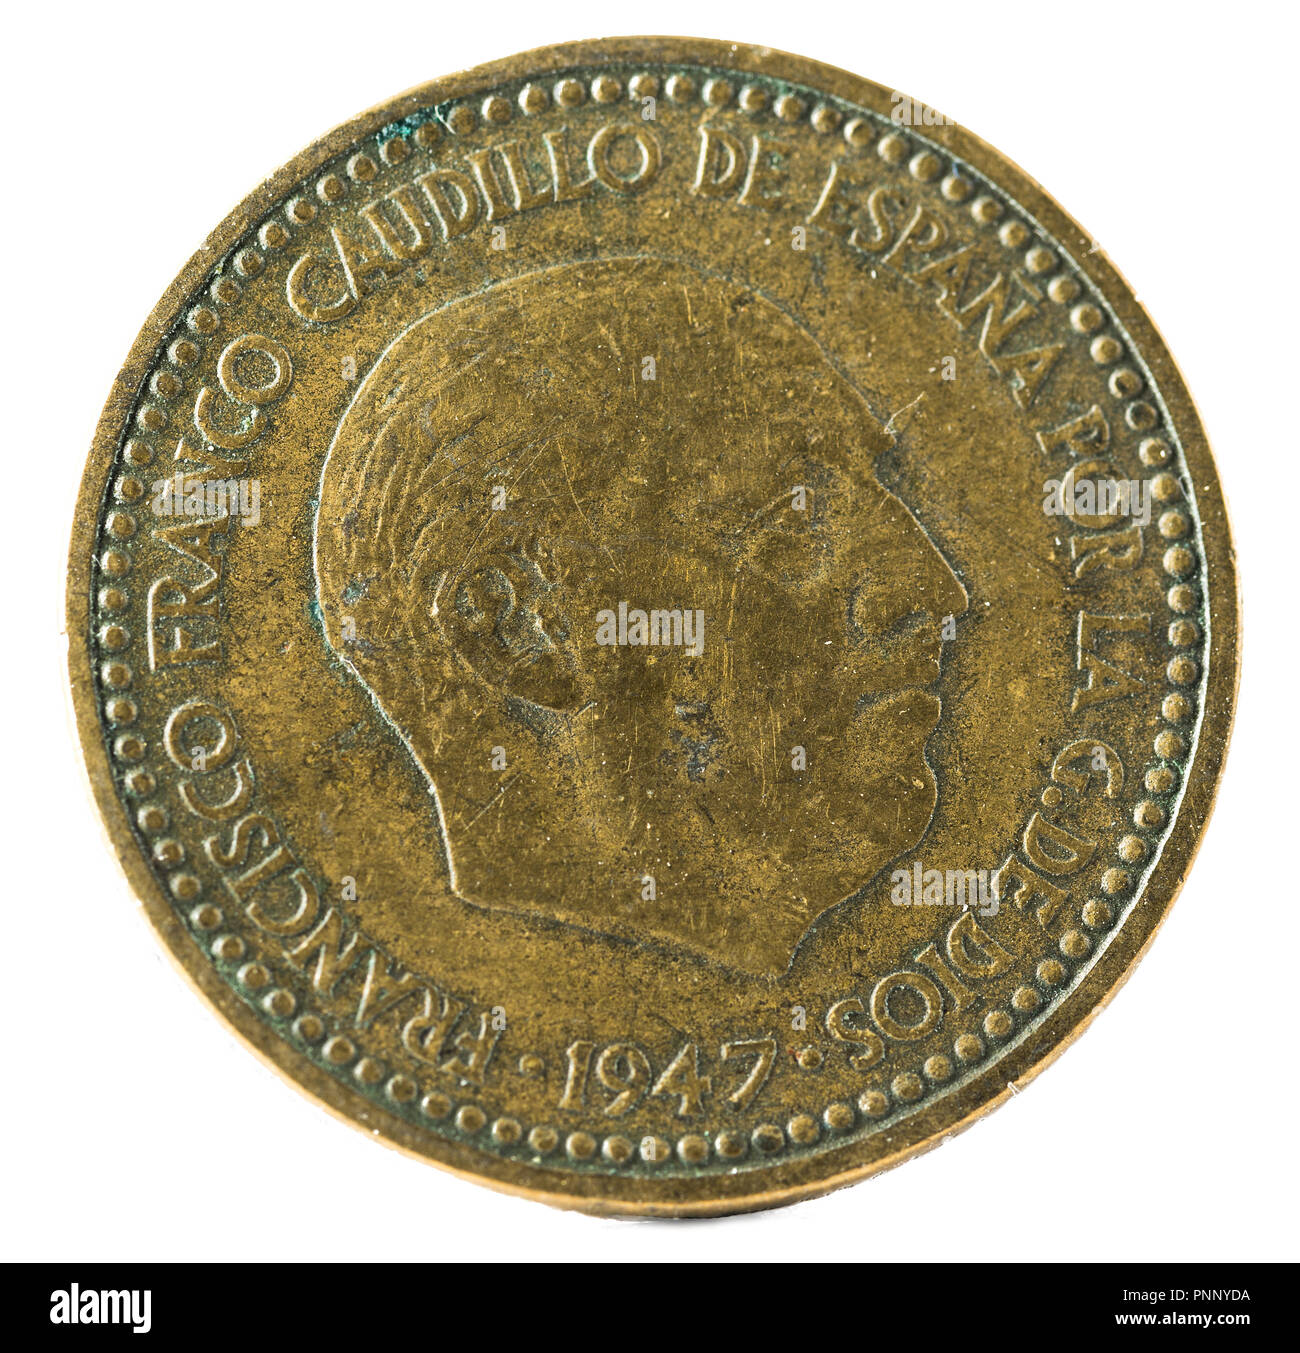 Old Spanish coin of 1 peseta, Francisco Franco. Year 1947, 19 51 in the stars. Obverse. Stock Photo